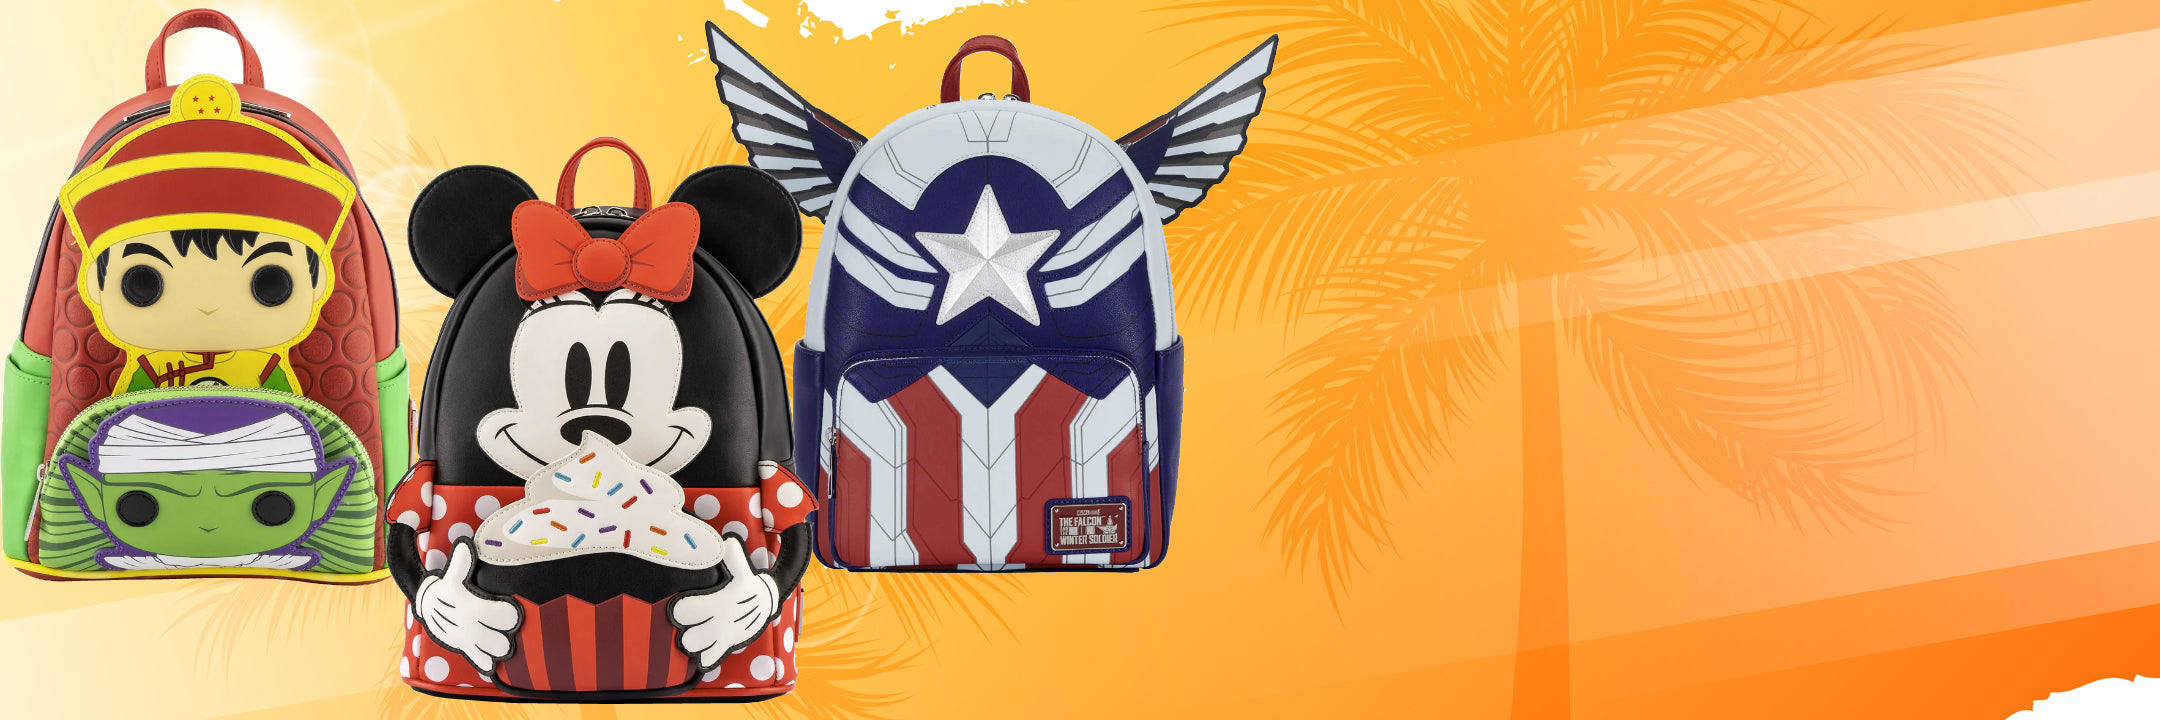 Lounge Fly Bags Dragons Ball Z Minnie Mouse Capitan America